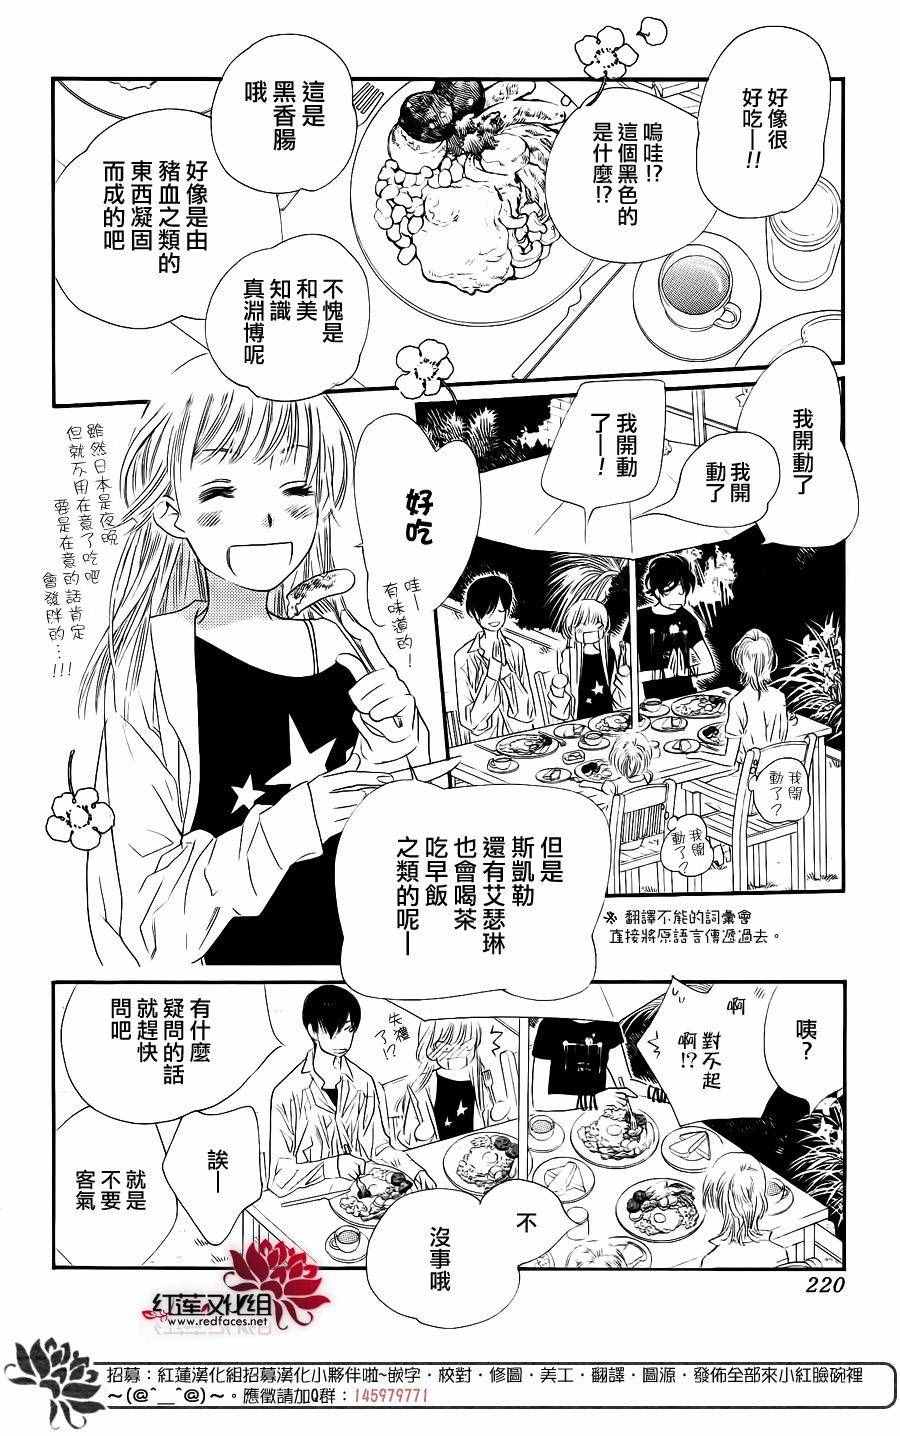 《in JACK out》漫画 后篇